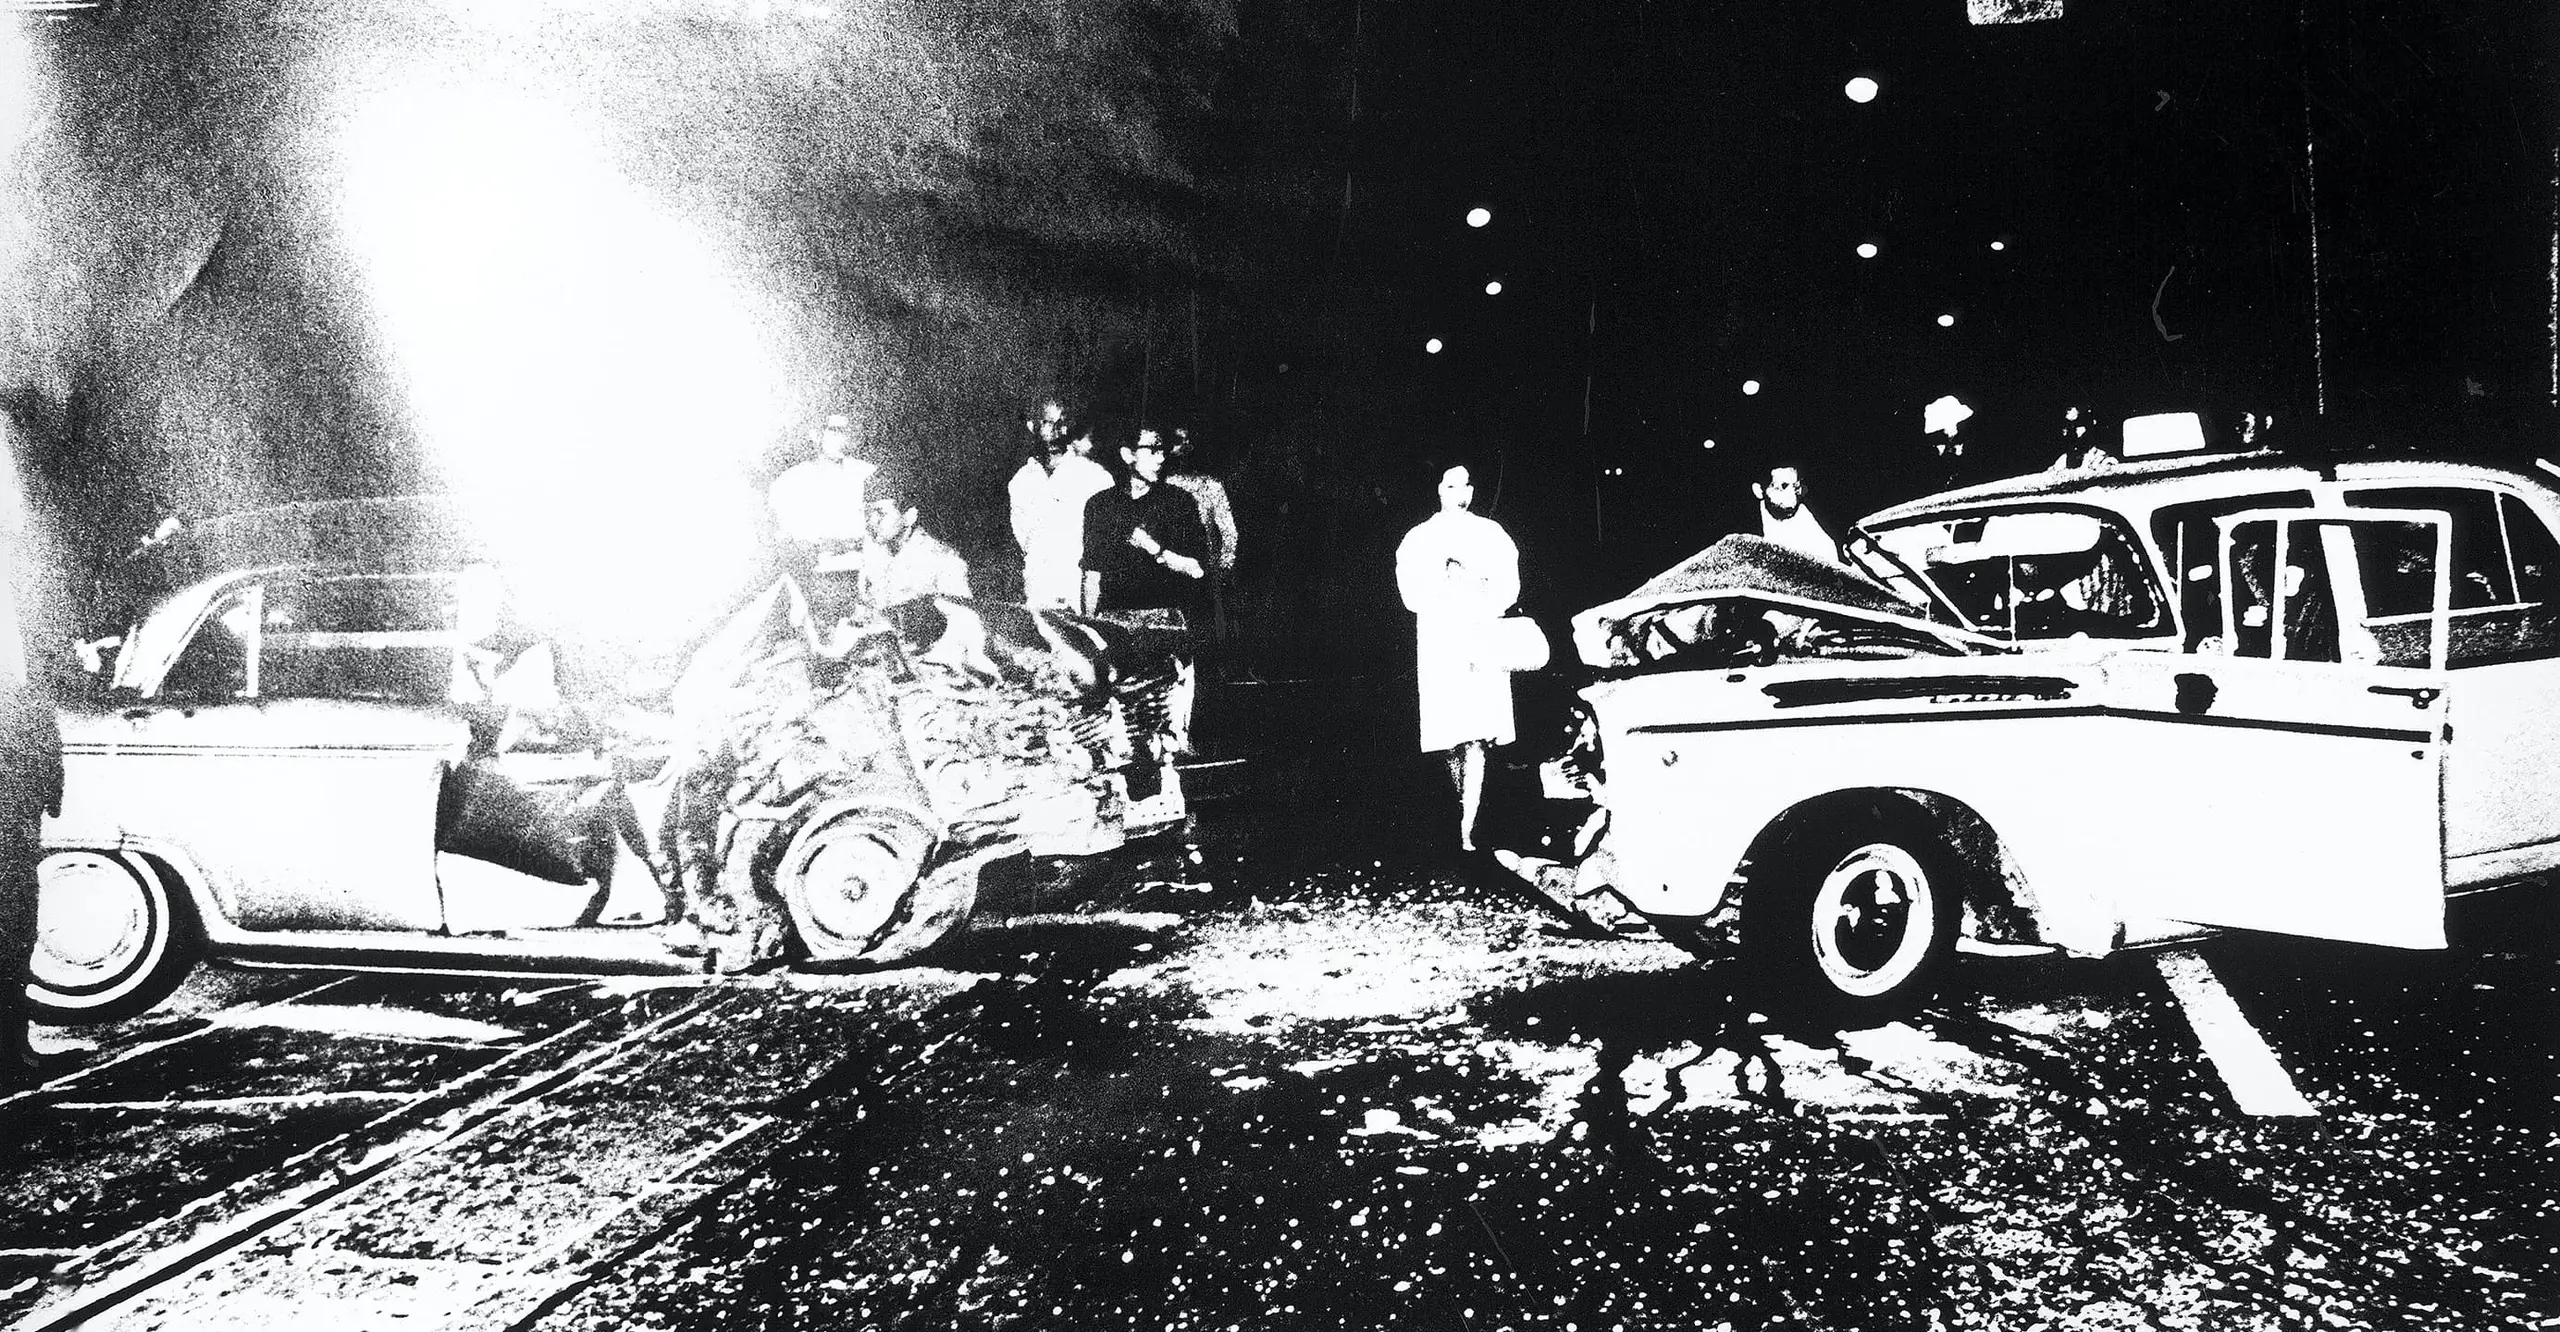 High contrast black and white photograph of two severely damaged cars and a small crowd